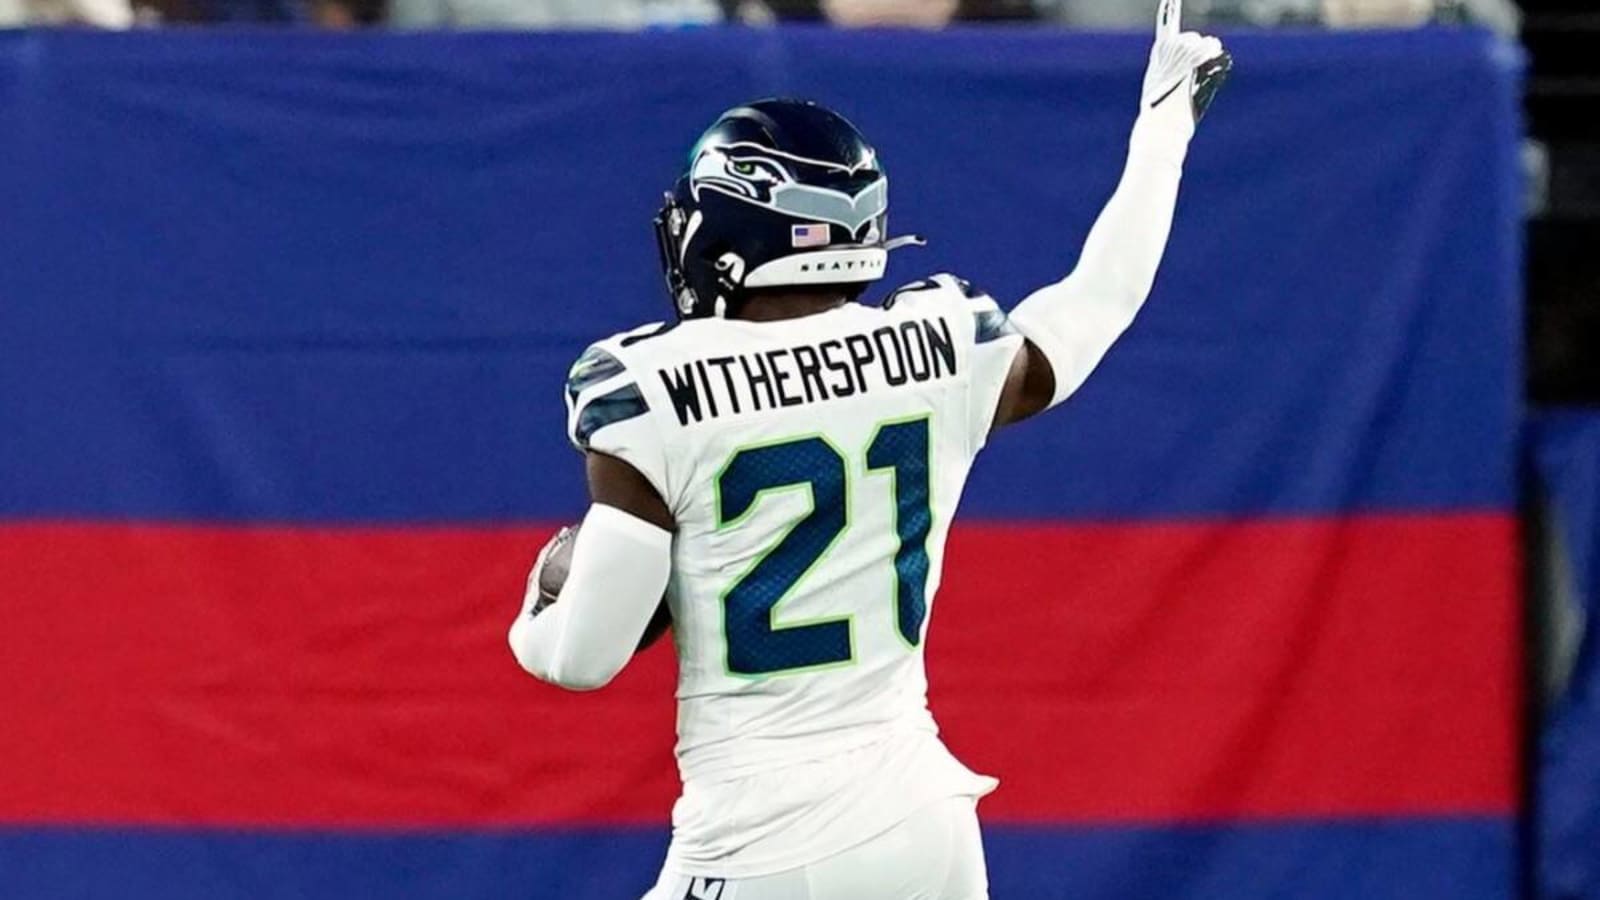 Seahawks EXCLUSIVE: Witherspoon Ready to &#39;Let Them Know&#39; in Year 2